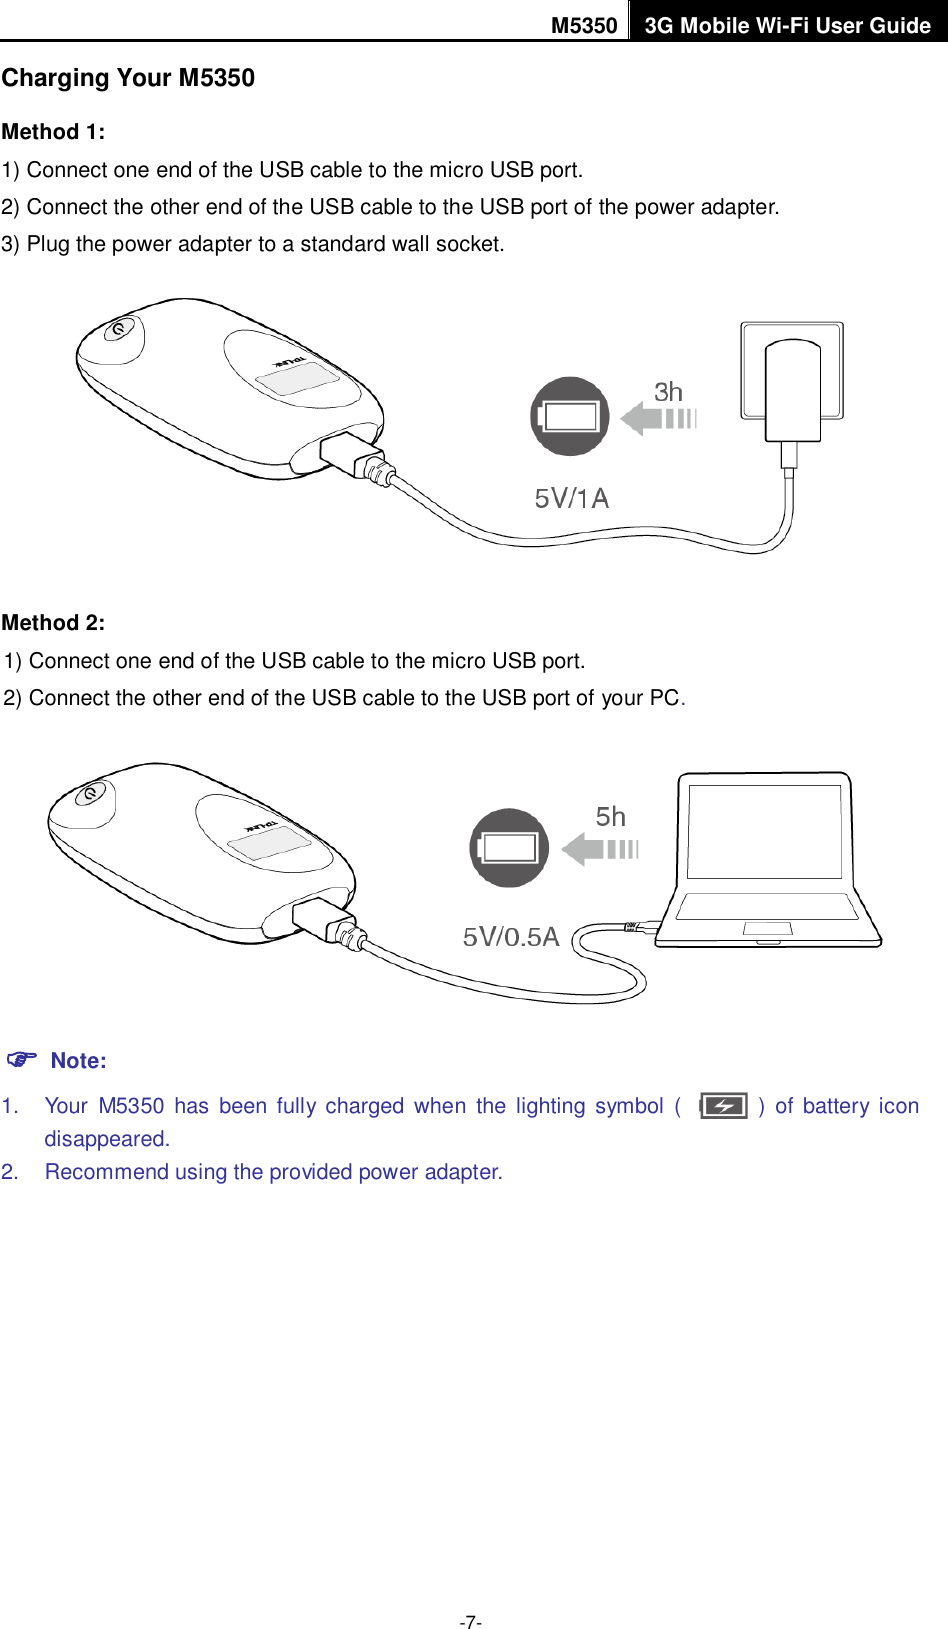 M5350 3G Mobile Wi-Fi User Guide  -7- Charging Your M5350 Method 1: 1) Connect one end of the USB cable to the micro USB port. 2) Connect the other end of the USB cable to the USB port of the power adapter. 3) Plug the power adapter to a standard wall socket.  Method 2: 1) Connect one end of the USB cable to the micro USB port. 2) Connect the other end of the USB cable to the USB port of your PC.   Note: 1.  Your  M5350  has  been  fully  charged  when the lighting  symbol  (              )  of  battery  icon disappeared. 2.  Recommend using the provided power adapter.    